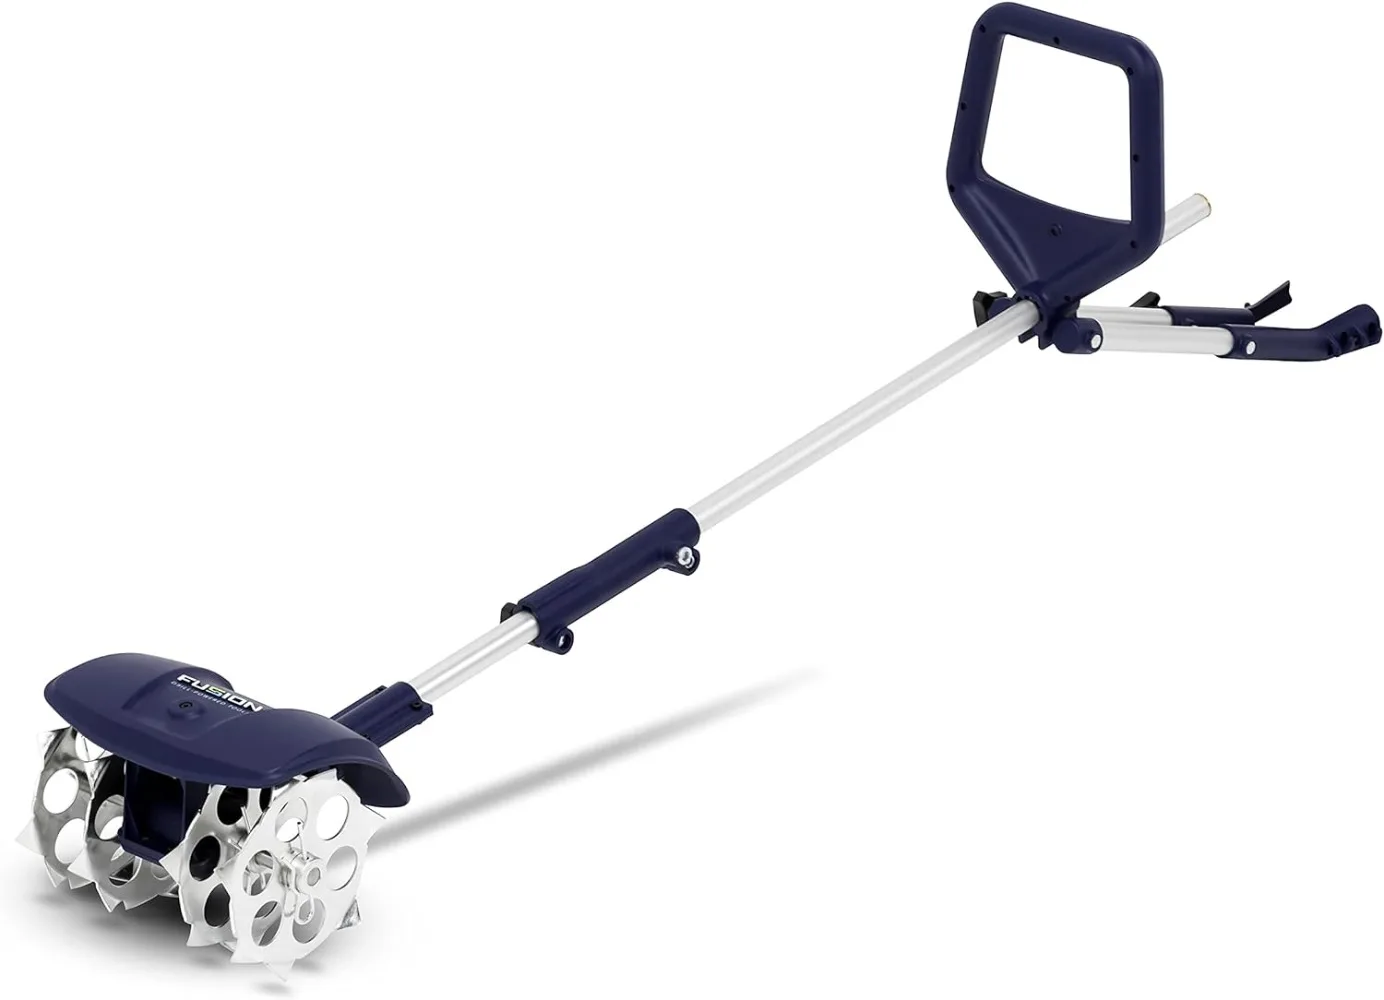 

Cultivator, Adjustable Tilling Width Up To 8”, Tilling Depth Up To 5.5”, Compatible with Most Cordless Drills Adjustable Length